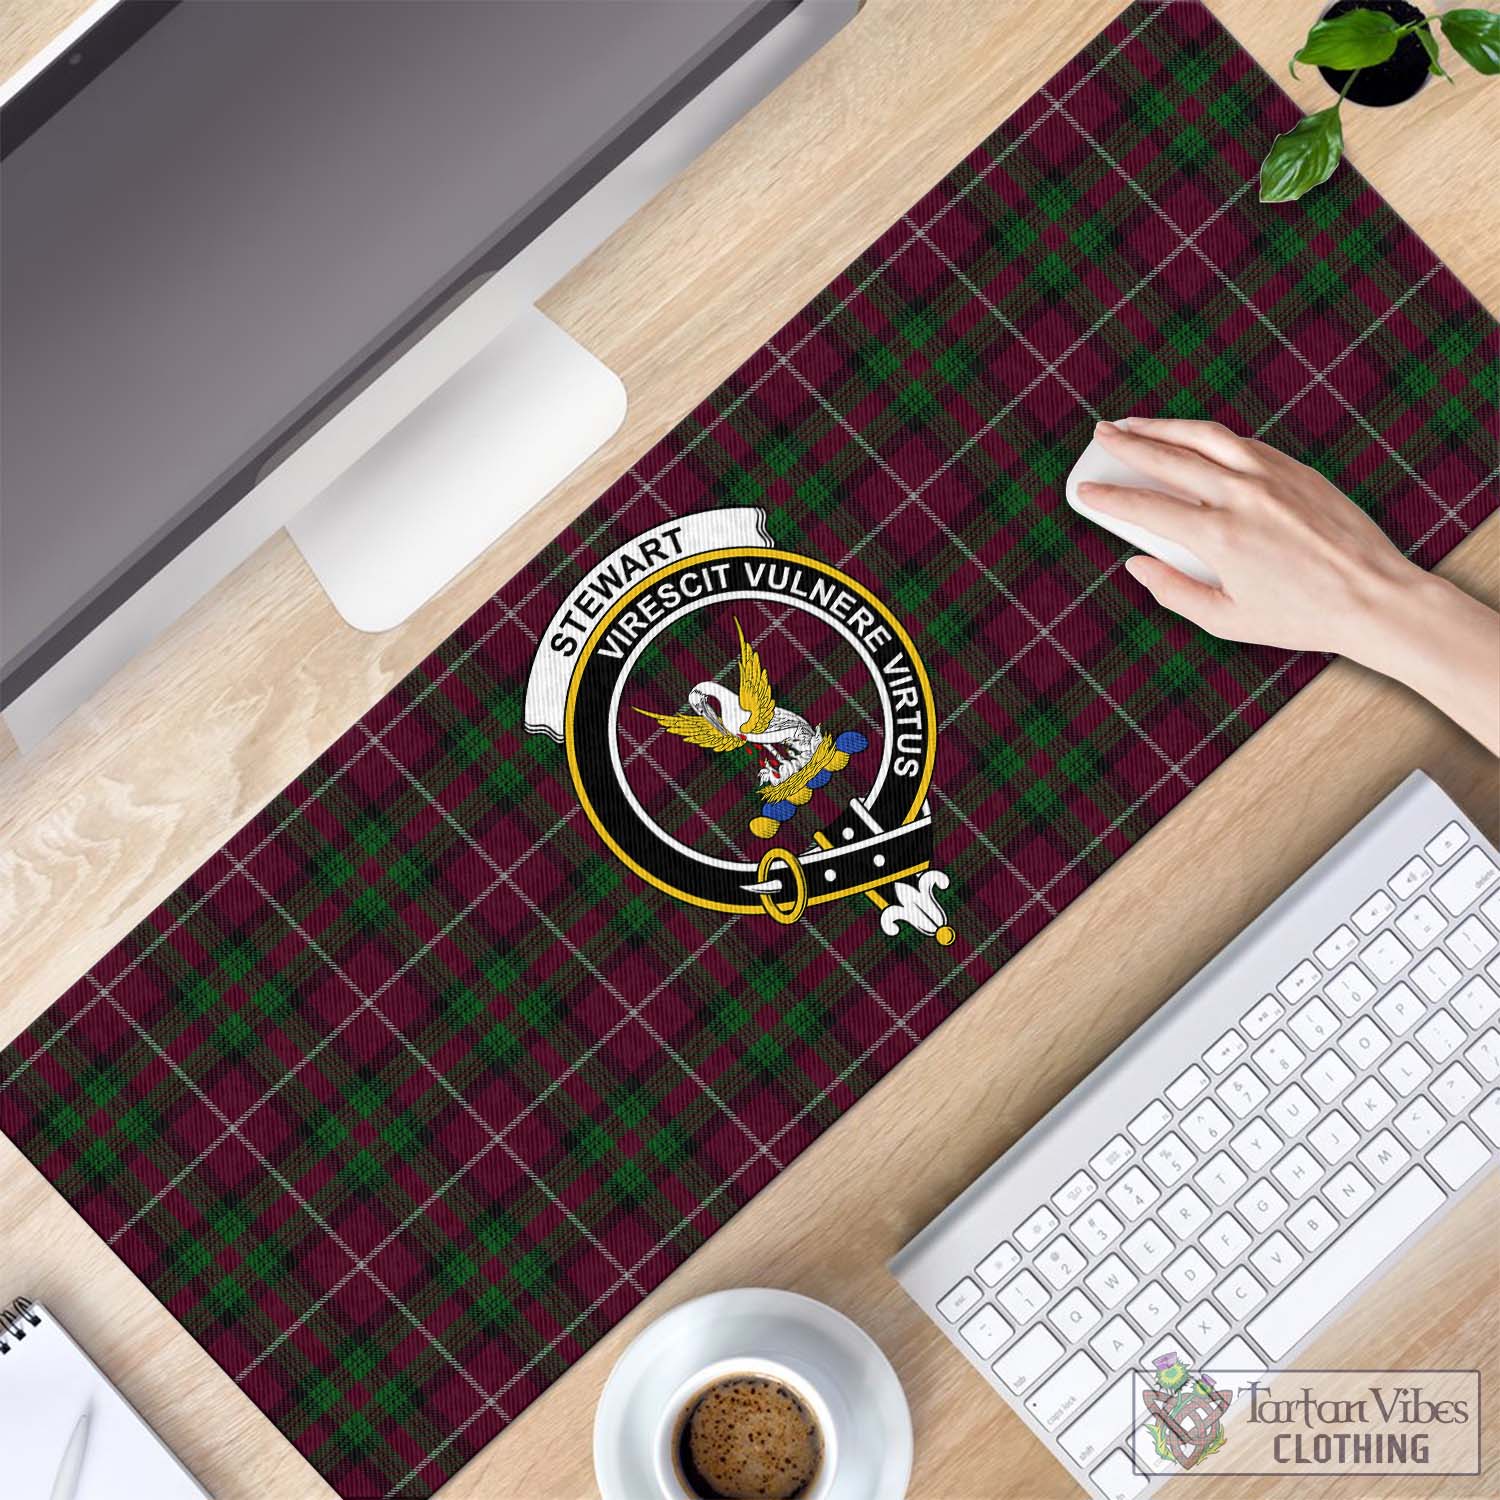 Tartan Vibes Clothing Stewart of Bute Hunting Tartan Mouse Pad with Family Crest